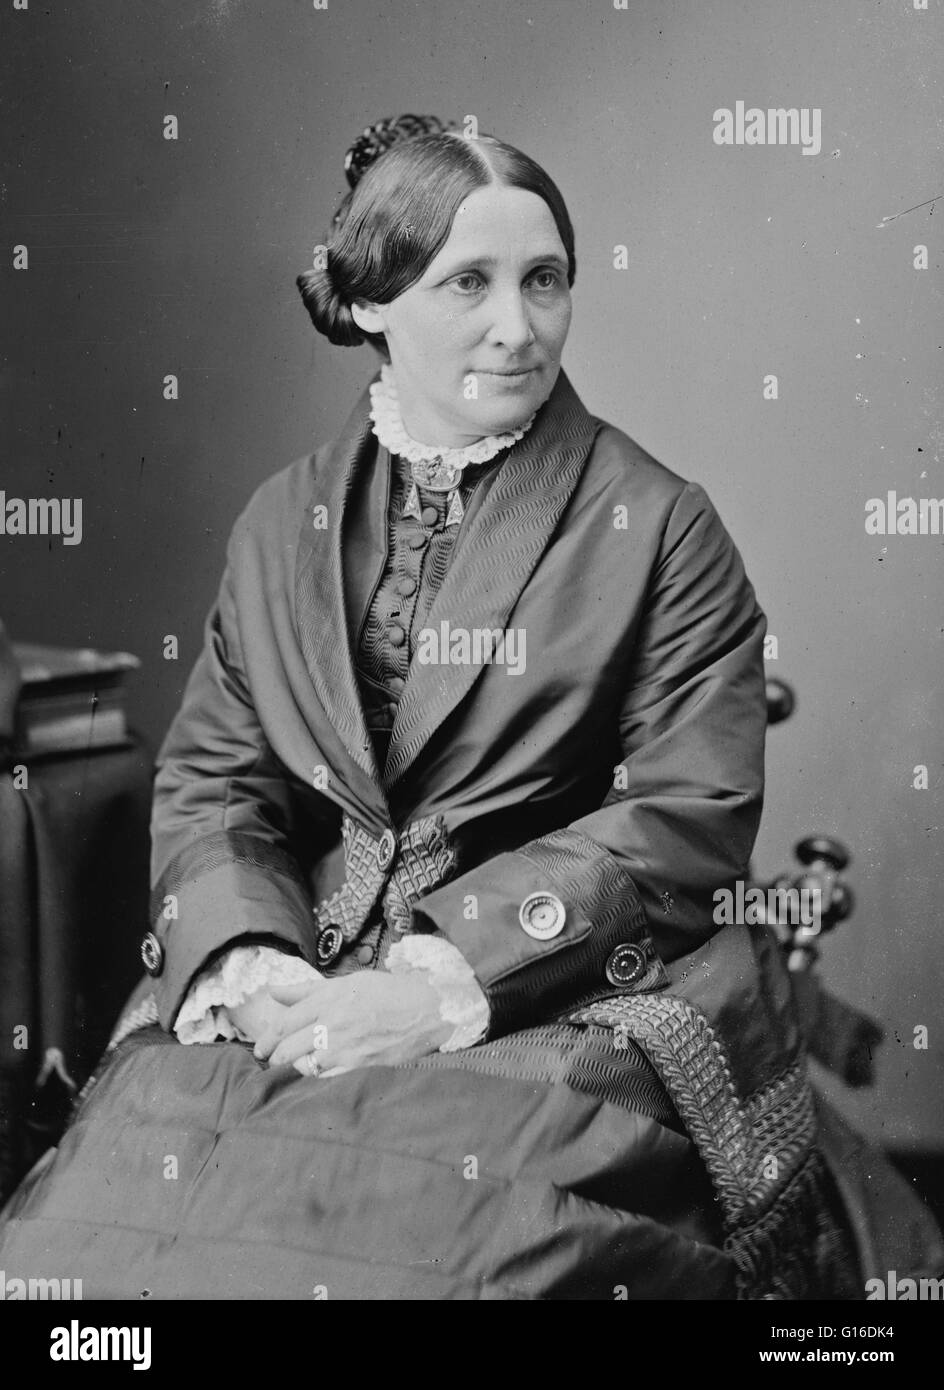 Lucy Ware Webb Hayes (August 28, 1831 - June 25, 1889) was a First Lady of the United States and the wife of President Rutherford B. Hayes. Lucy met Rutherford B. Hayes in 1847. Later that year, she enrolled at Wesleyan Women's College, class of 1850; she Stock Photo